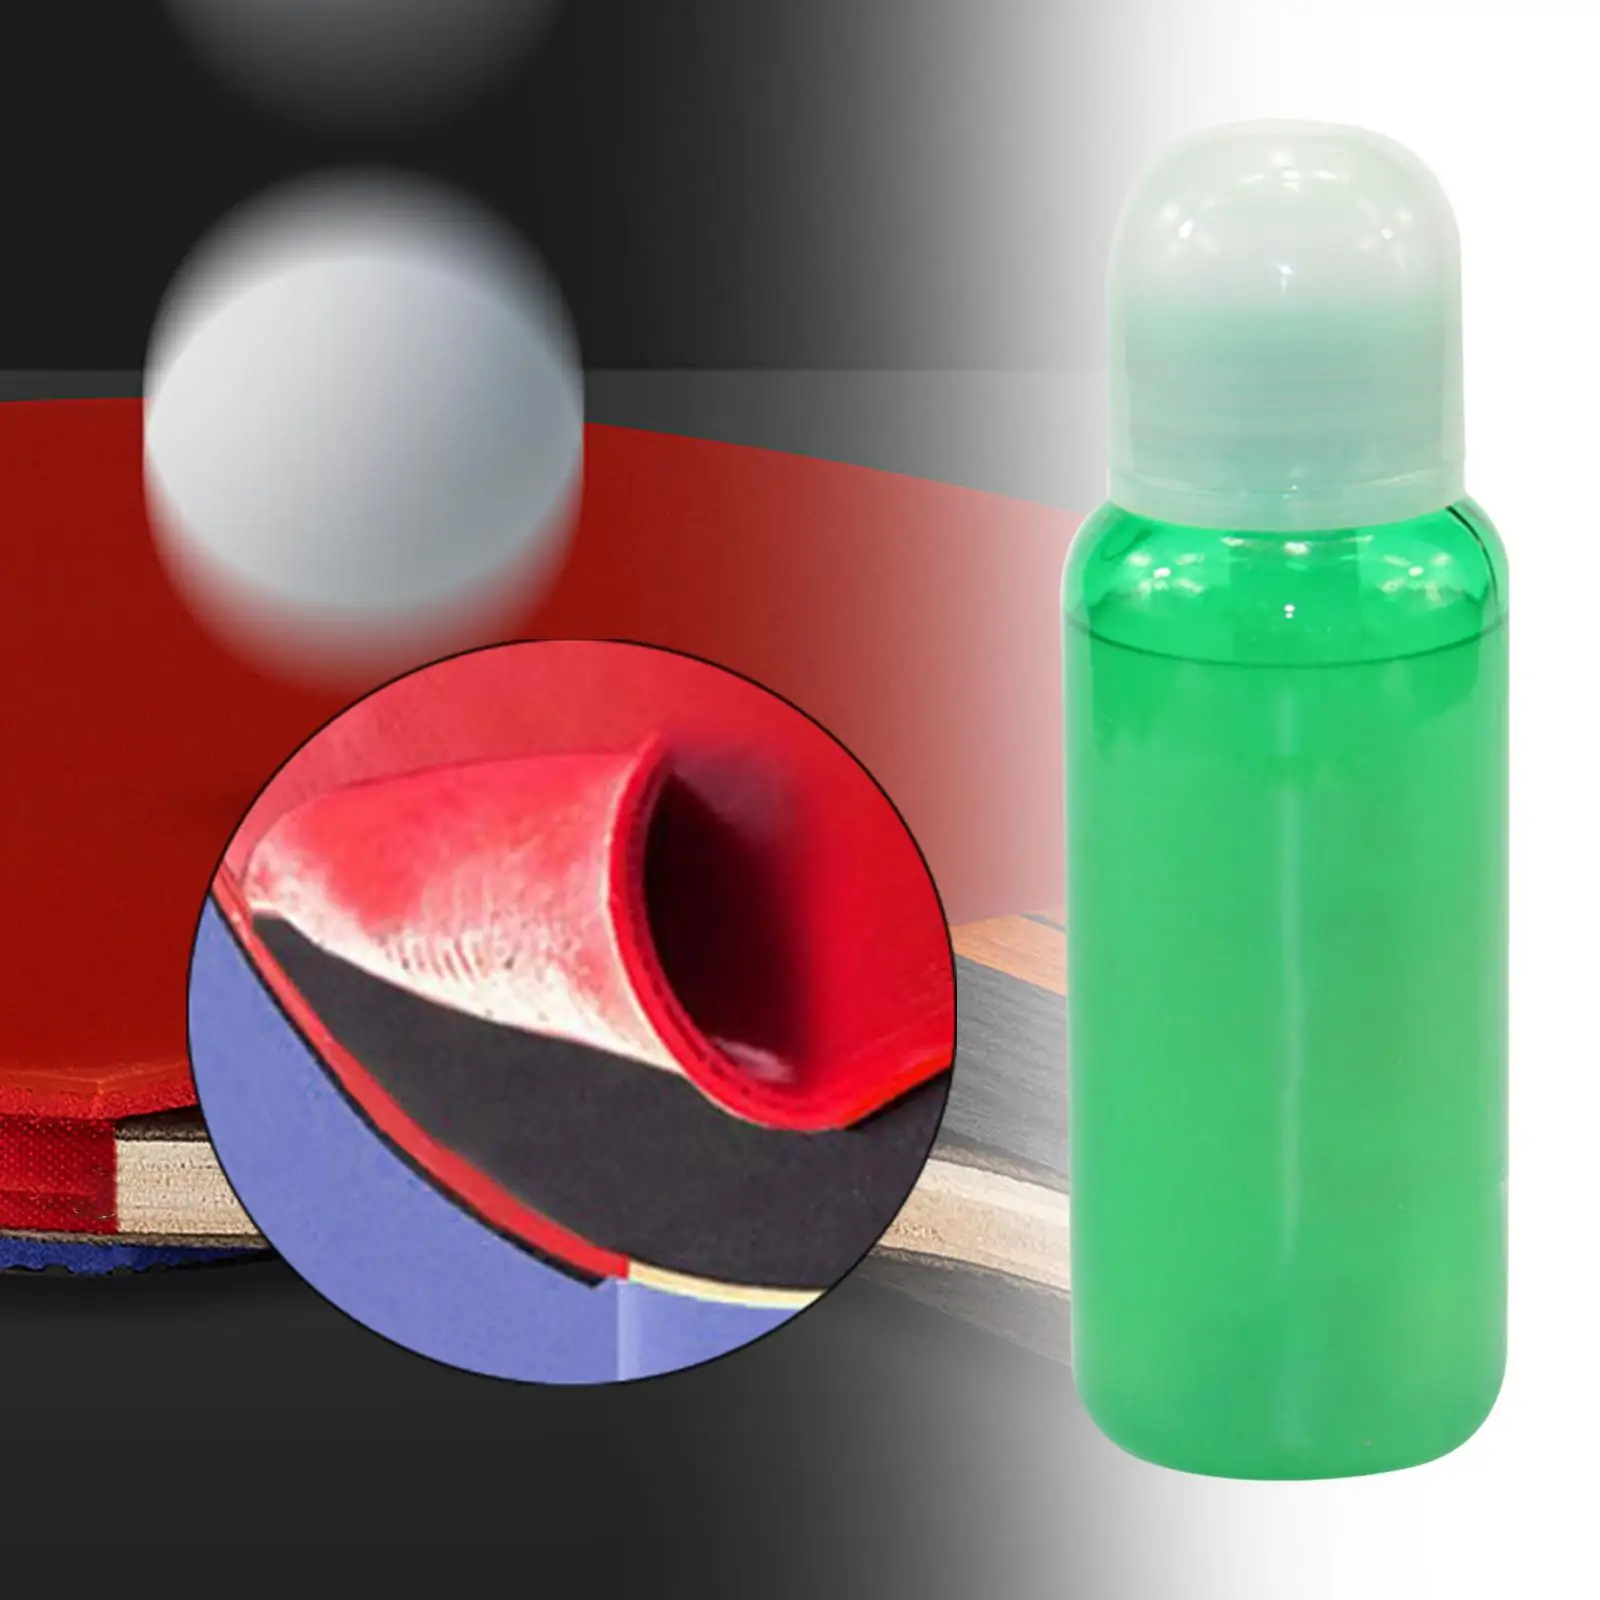 Table Tennis Glue Rubber Glue Speed Glue Easy to Apply Improve The Ball Speed 250ml Ping Pong Paddles for Bat Paddle Assembling